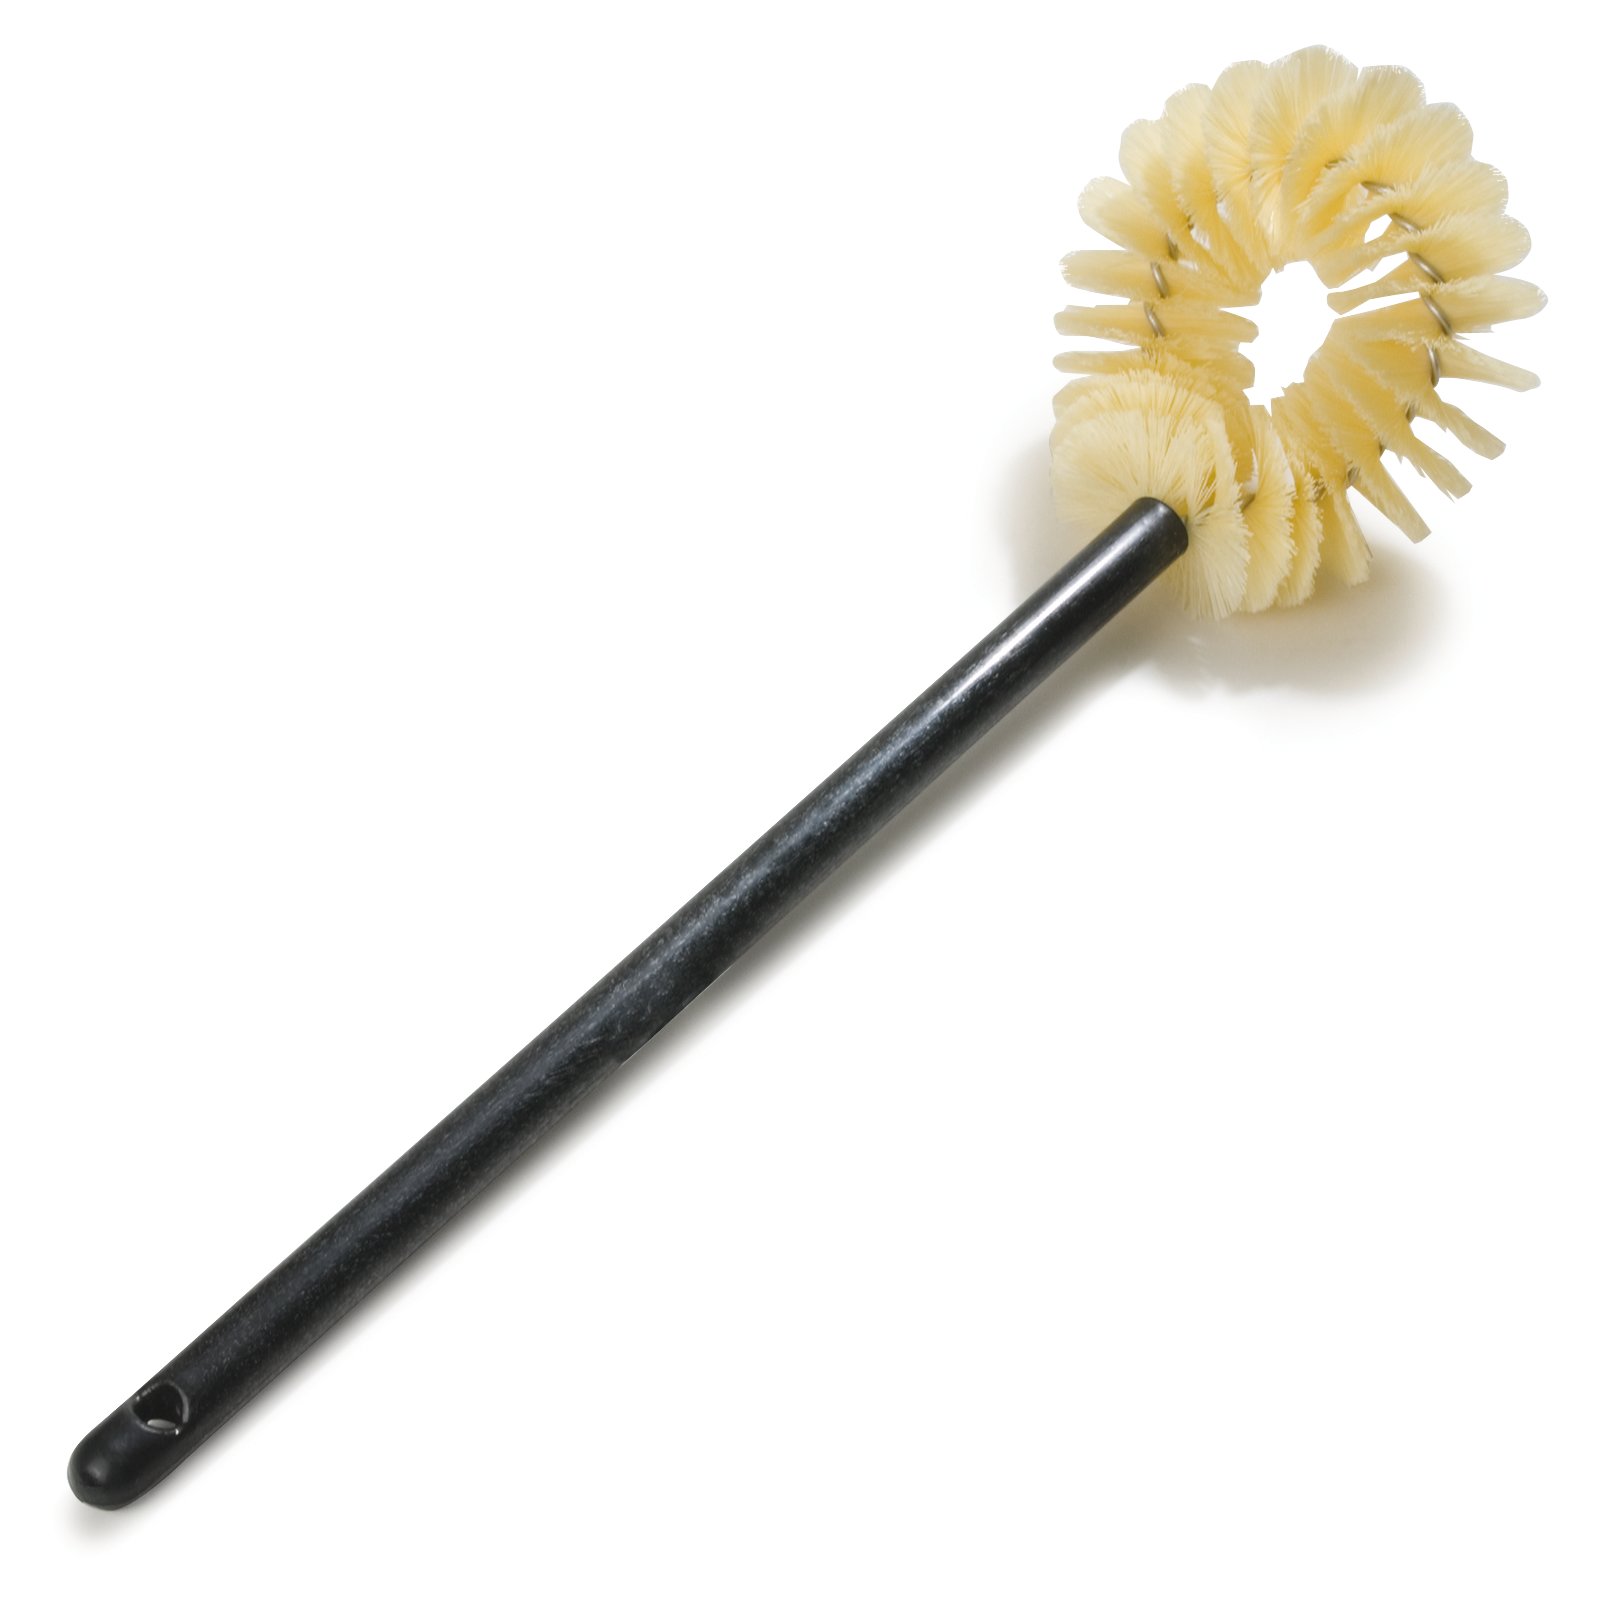 Carlisle FoodService Products 36719700 Toilet Bowl Brush with Hideaway  Holder, 16, 14.5 Height, 3 Width, Polypropylene, White